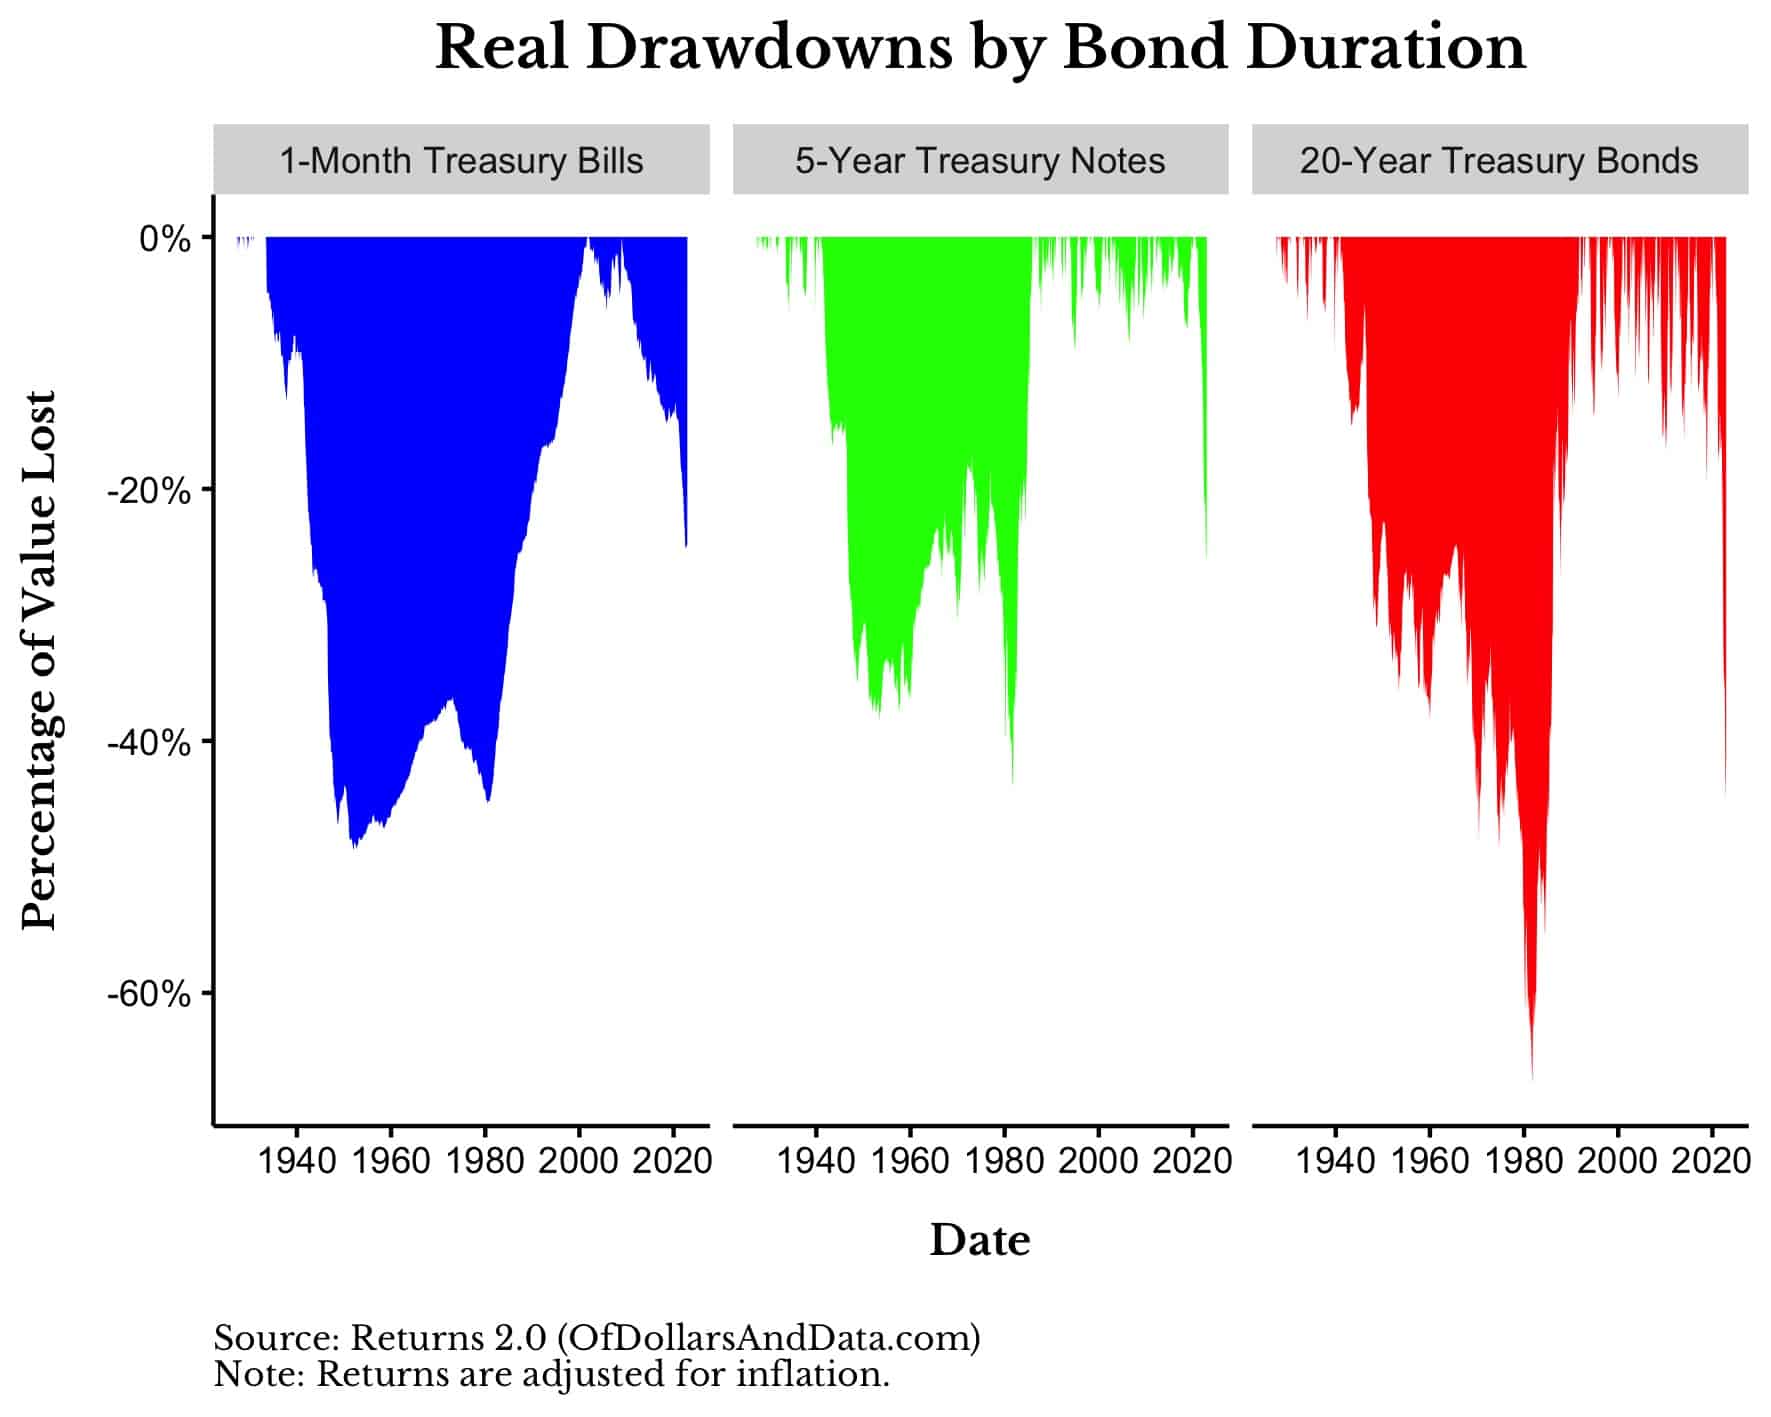 Real drawdowns by bond duration from 1926-2022.